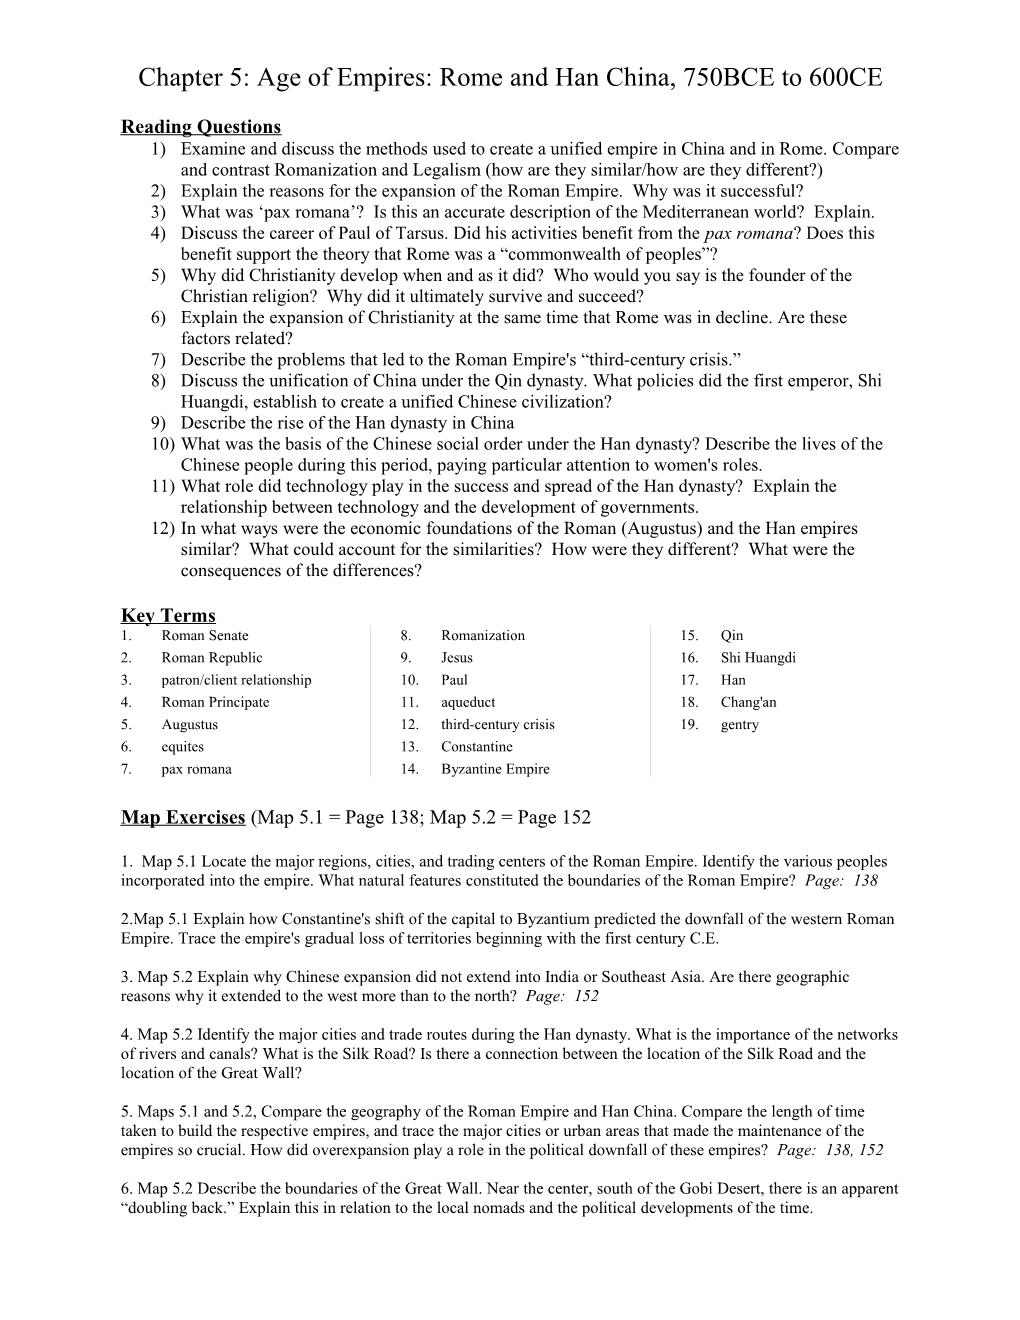 Student Handout Chapter 5: the Roman World and Han China